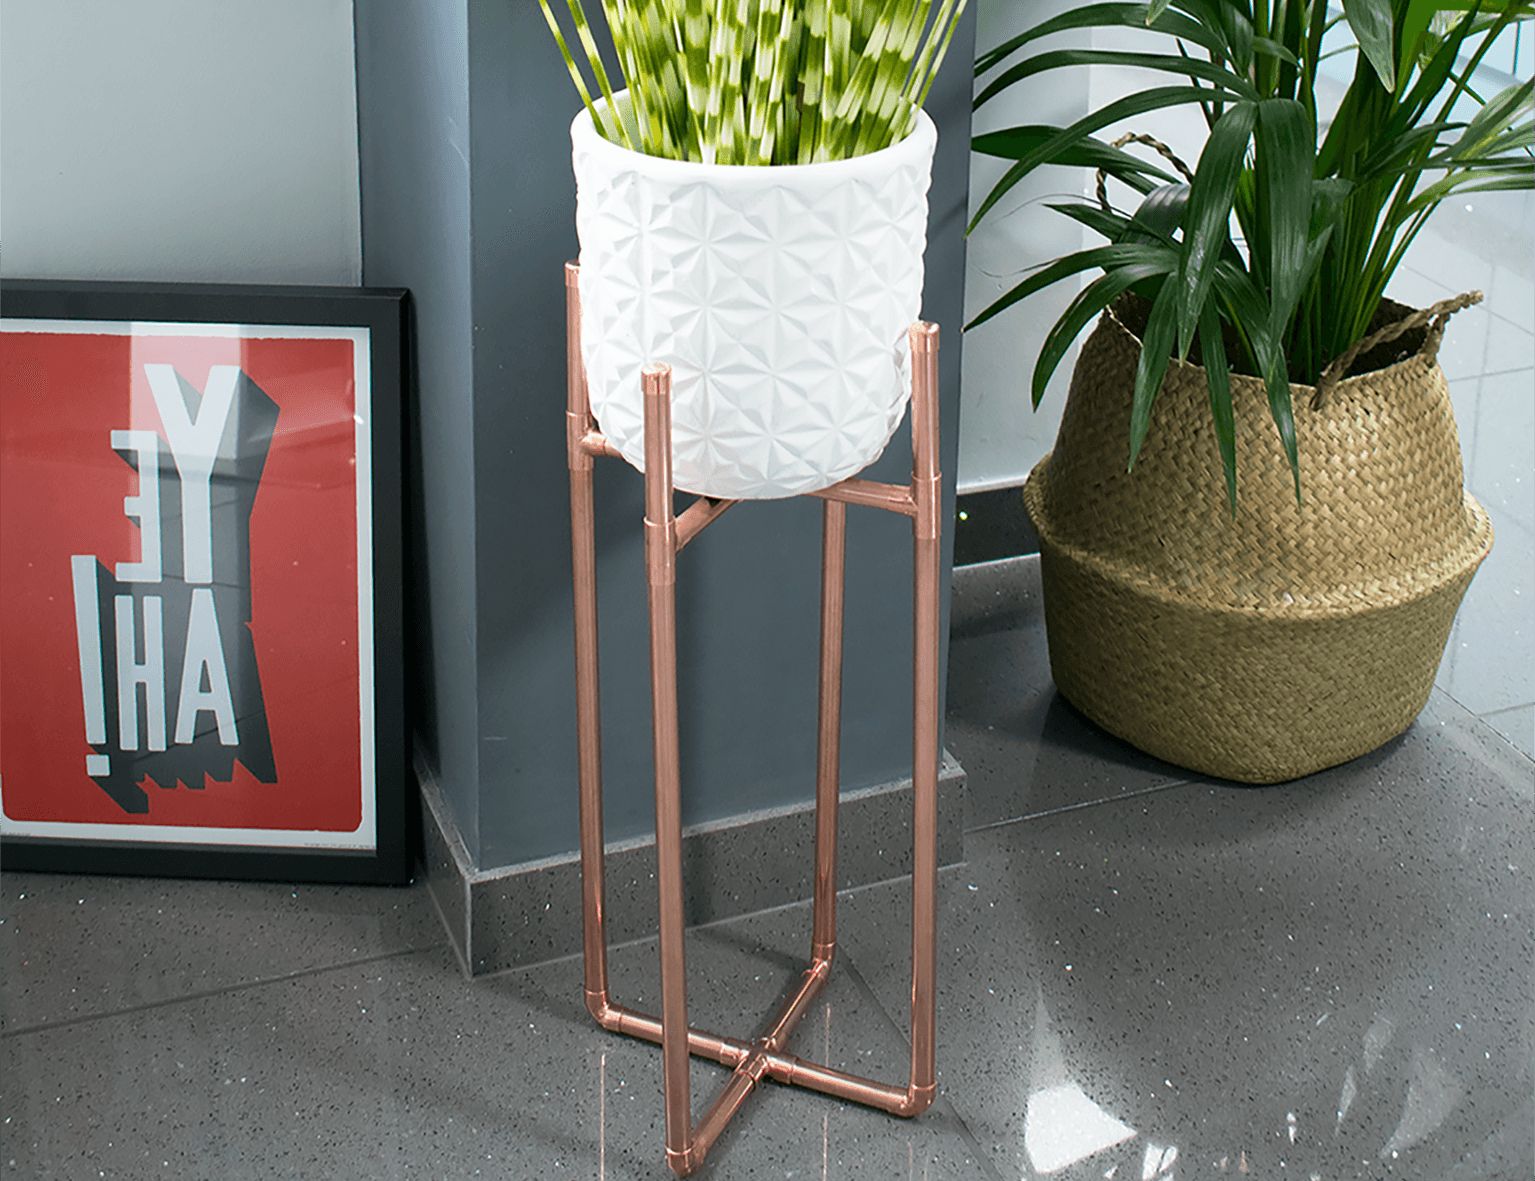 Trendy Copper Plant Stands Throughout How To Make A Diy Copper Plant Stand – Caradise (View 10 of 10)